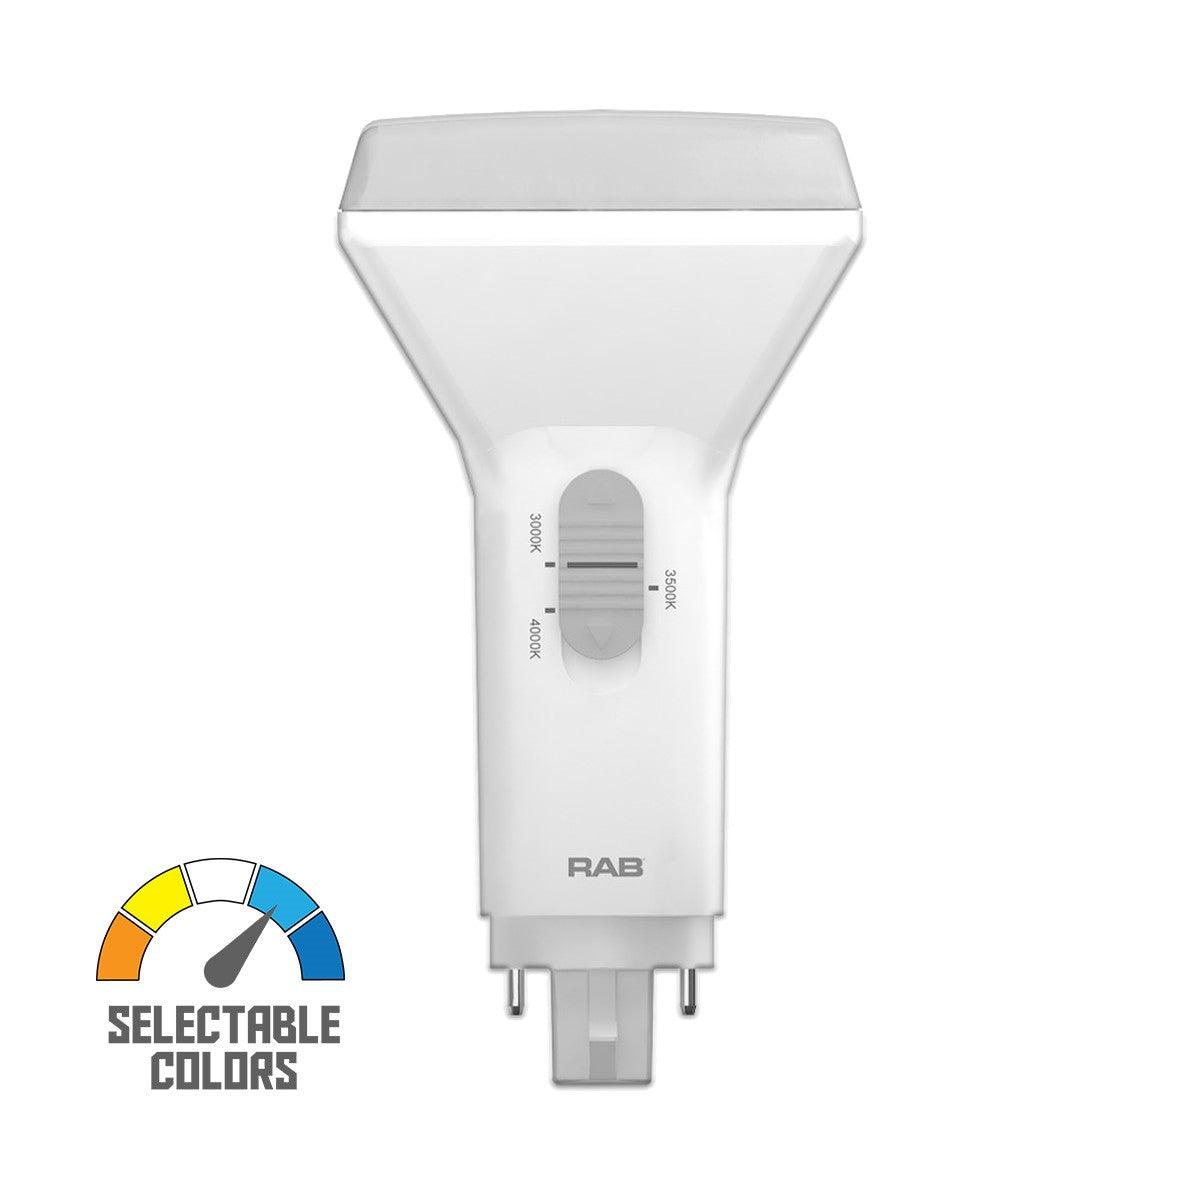 2 pin PL LED Bulb, 9 Watt 1150 Lumens, Selectable CCT 30K/35K/40K, Vertical, Replaces 26W CFL, G24d Base, Direct Or Bypass - Bees Lighting